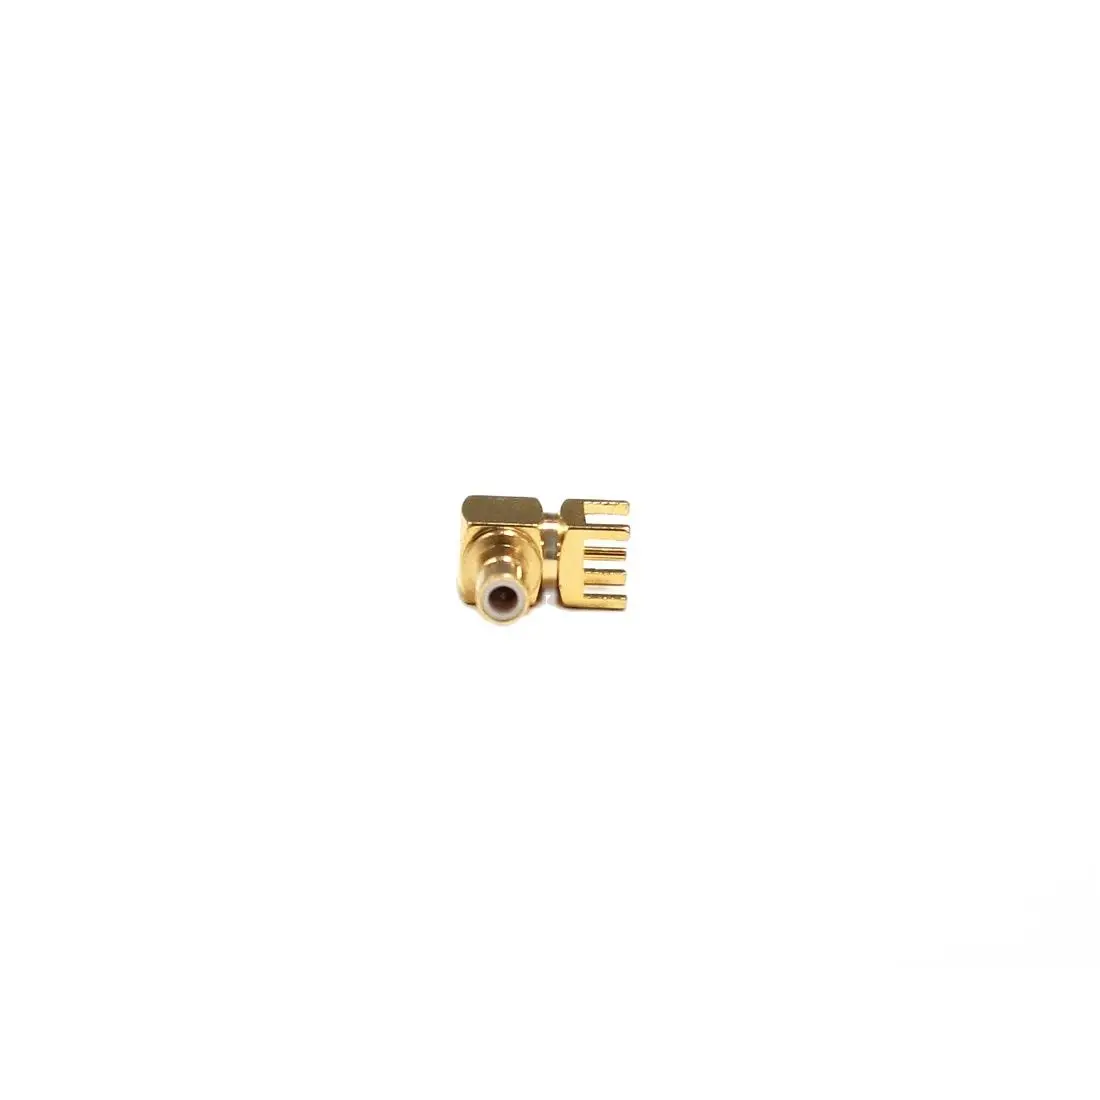 1pc SMB Male Plug  RF Coax Convertor Connector  PCB Mount  Right Angle 90-degree Goldplated NEW  Wholesale